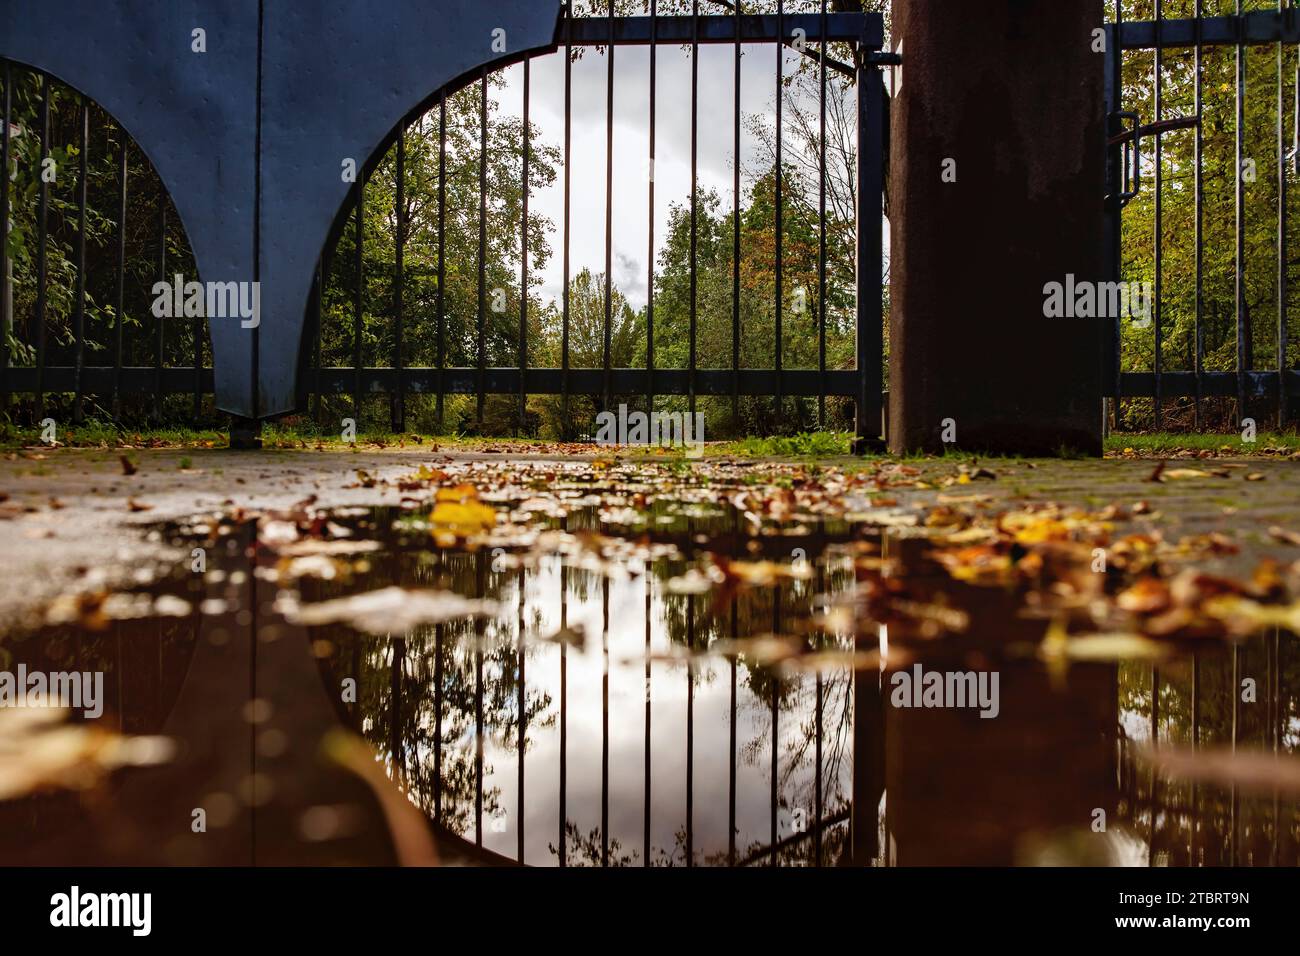 A gate reflected in a puddle covered with leaves. Stock Photo